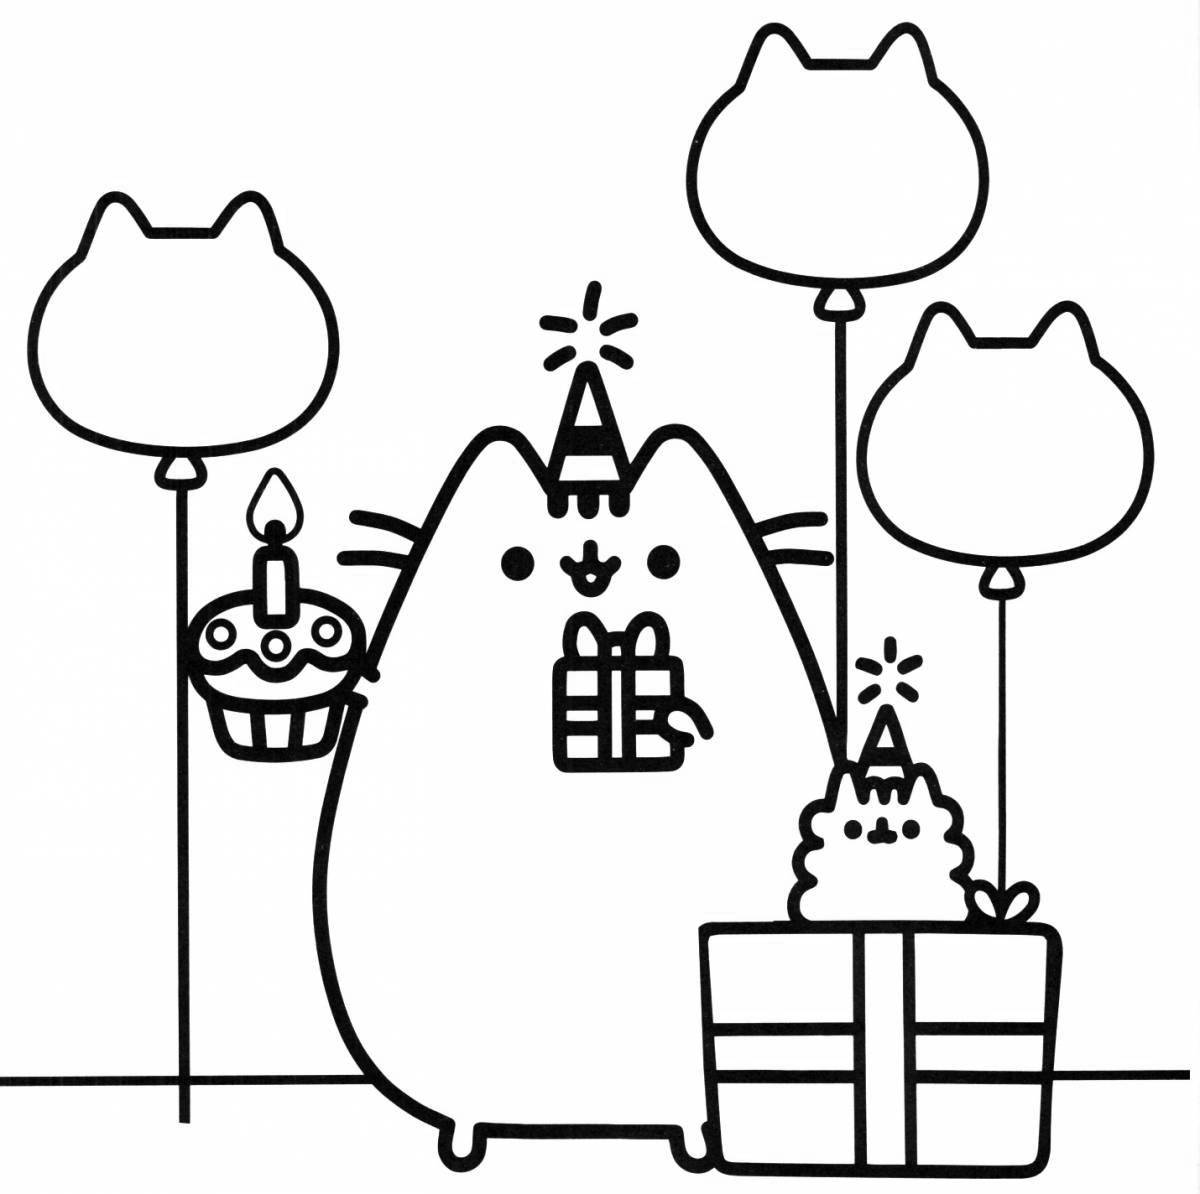 Cute and happy cat coloring book